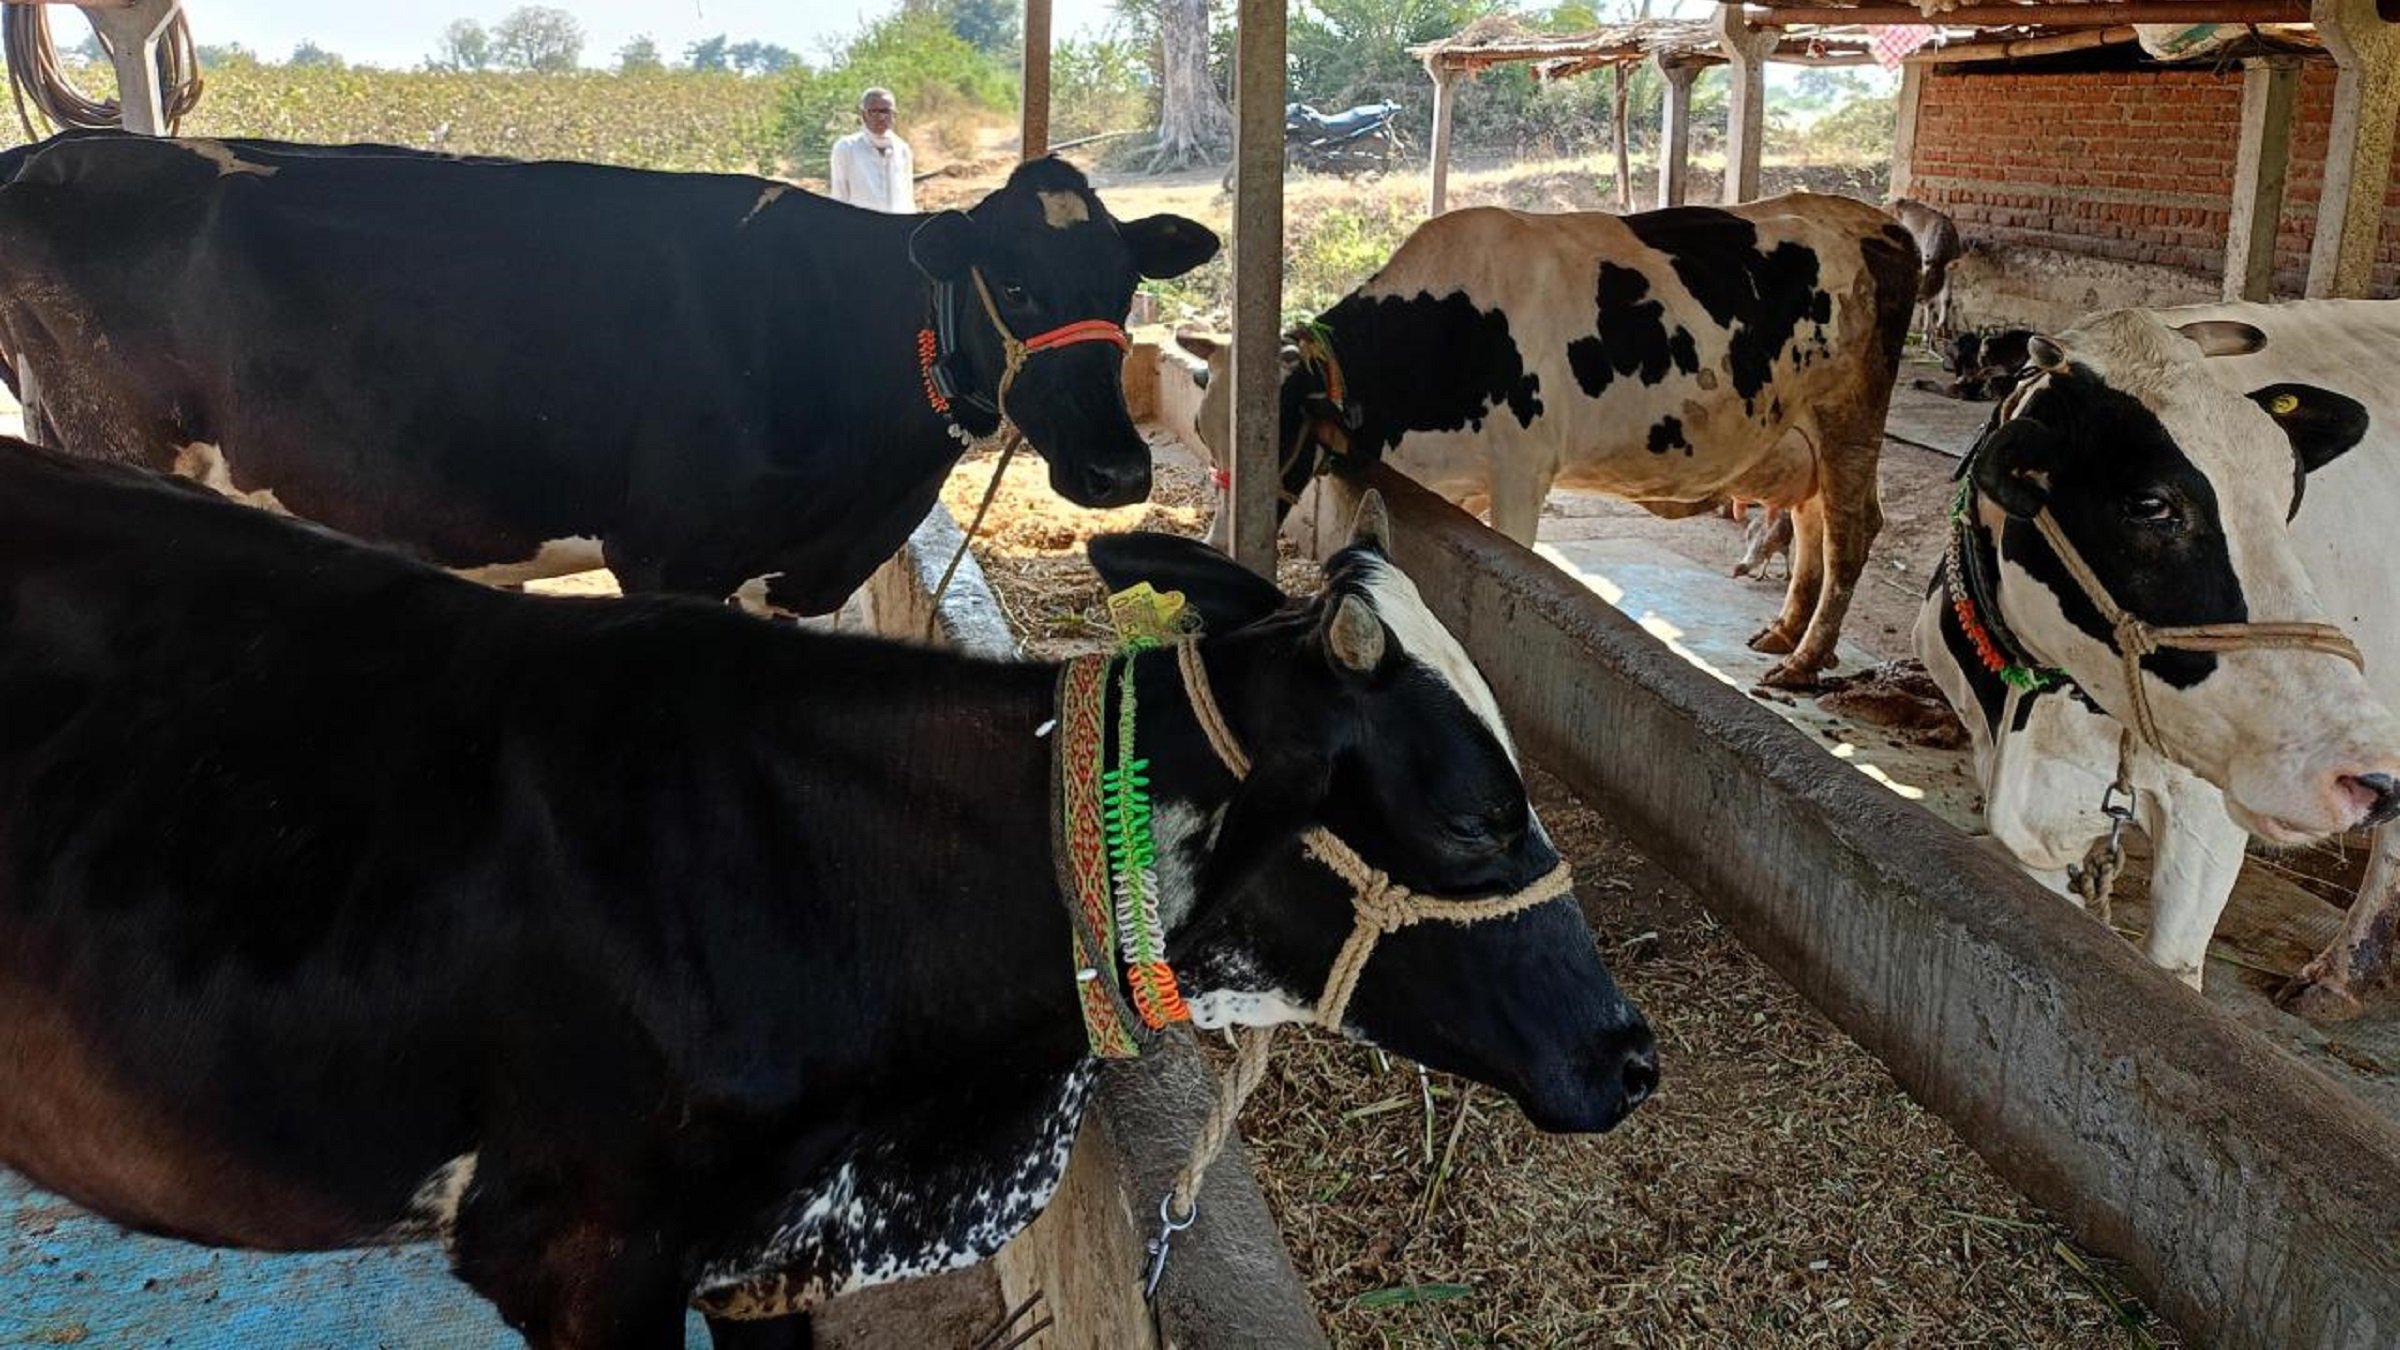 The cows of farmers participating in the Antargaon Dairy Development Project wear IoT collar devices to track health parameters